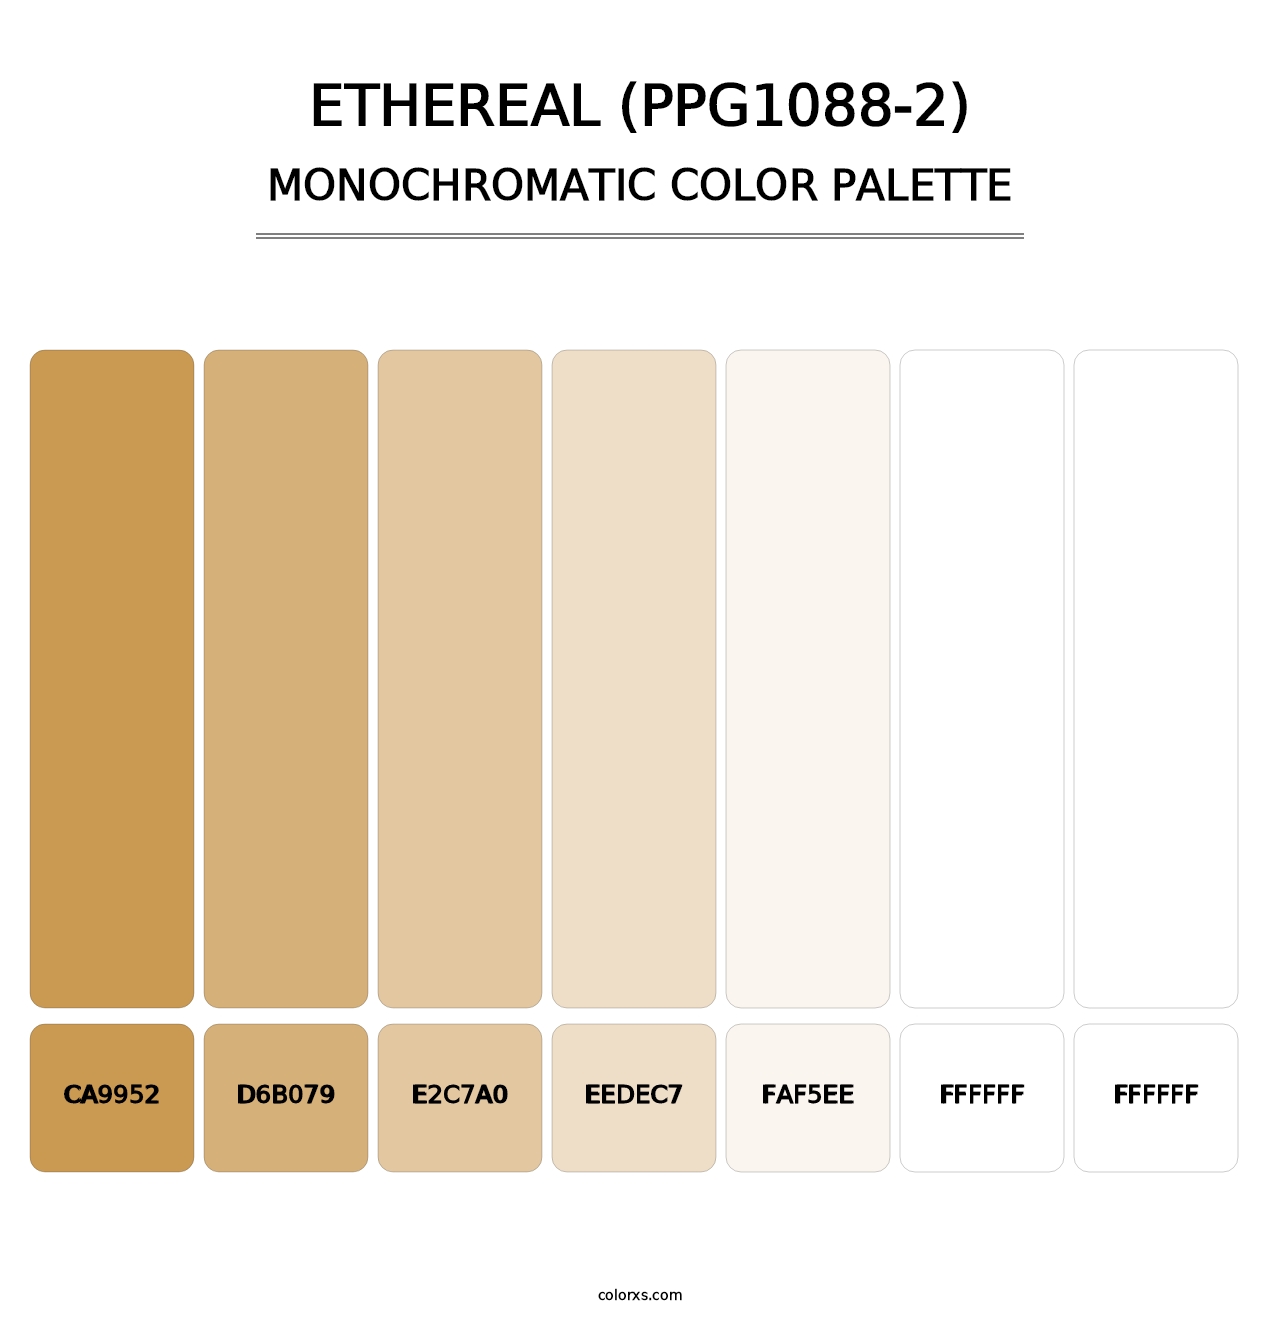 Ethereal (PPG1088-2) - Monochromatic Color Palette